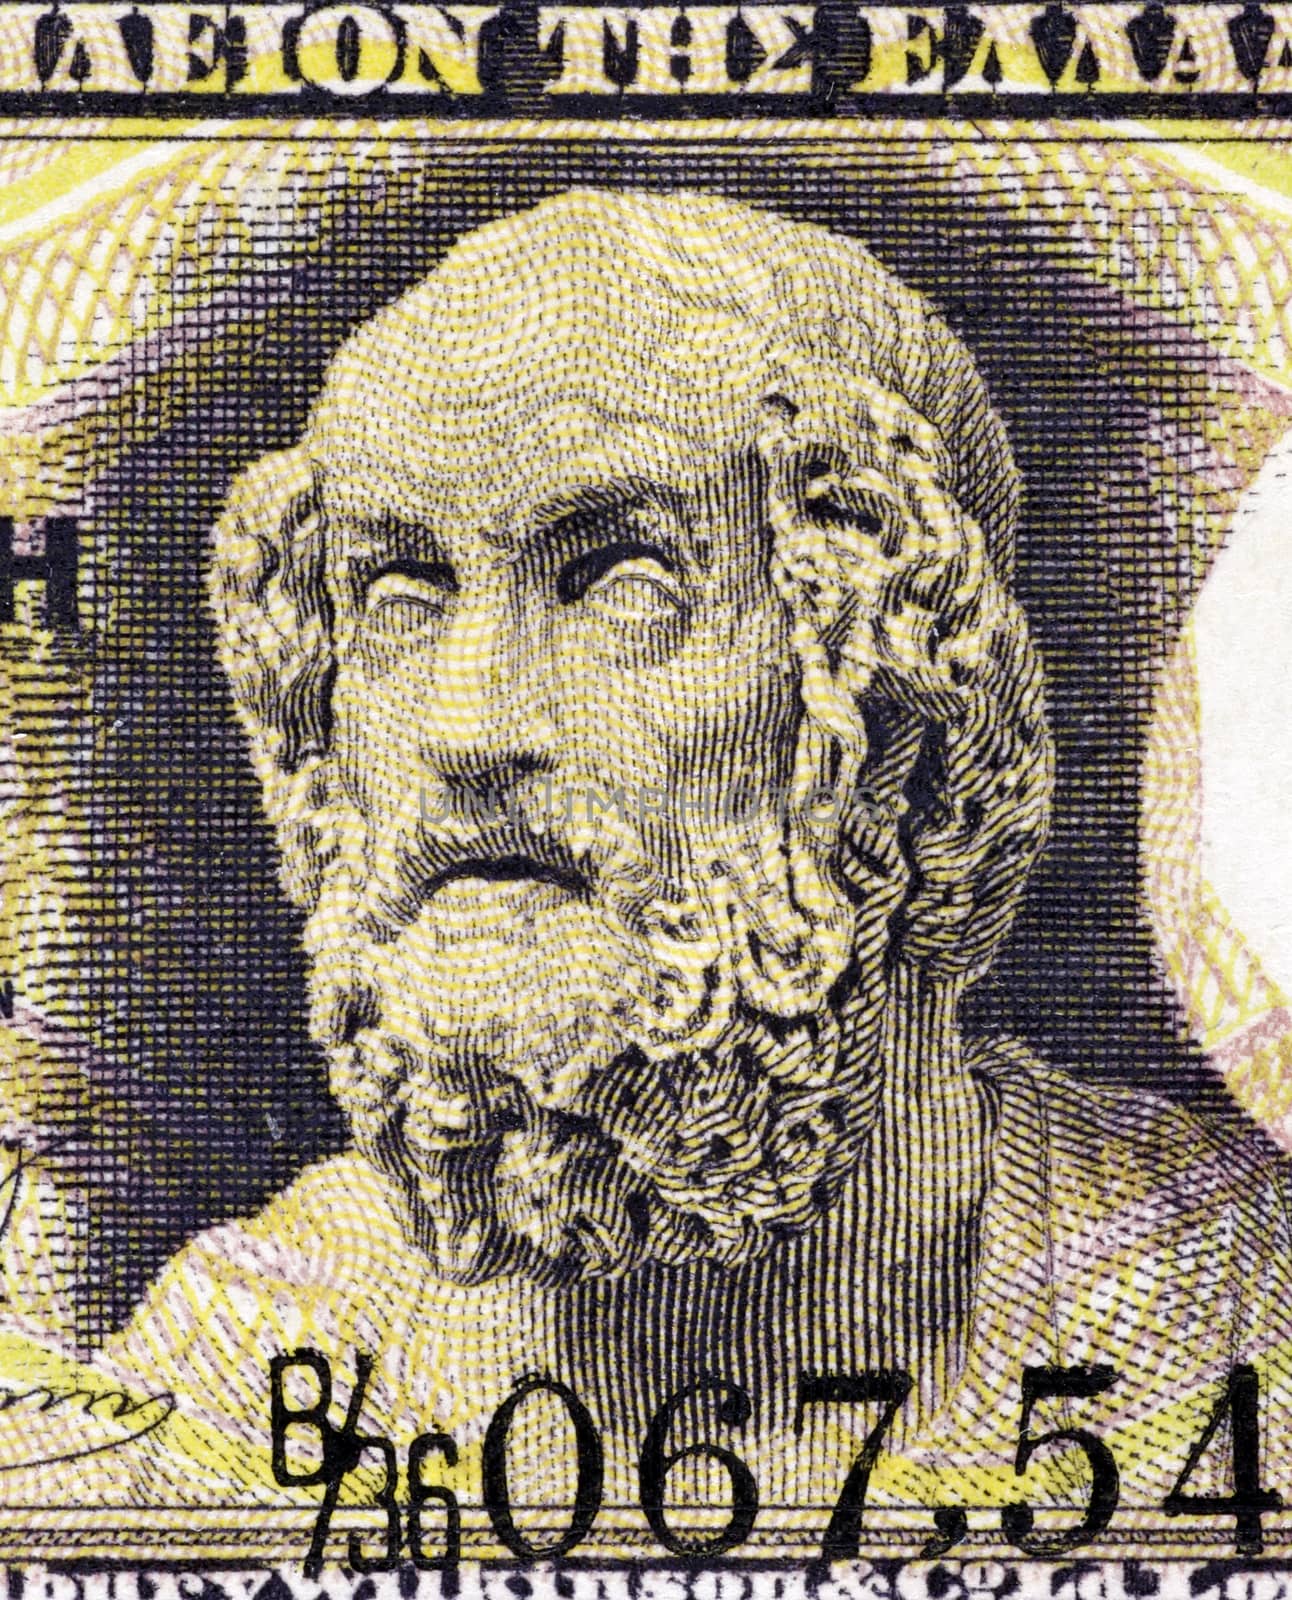 Homer on 1 Drachma 1917 Banknote from Greece. Author of the Iliad and the Odyssey, considered as the greatest of ancient Greek epic poets. His epics lie at the beginning of the Western canon of literature and have had an enormous influence on the history of literature.